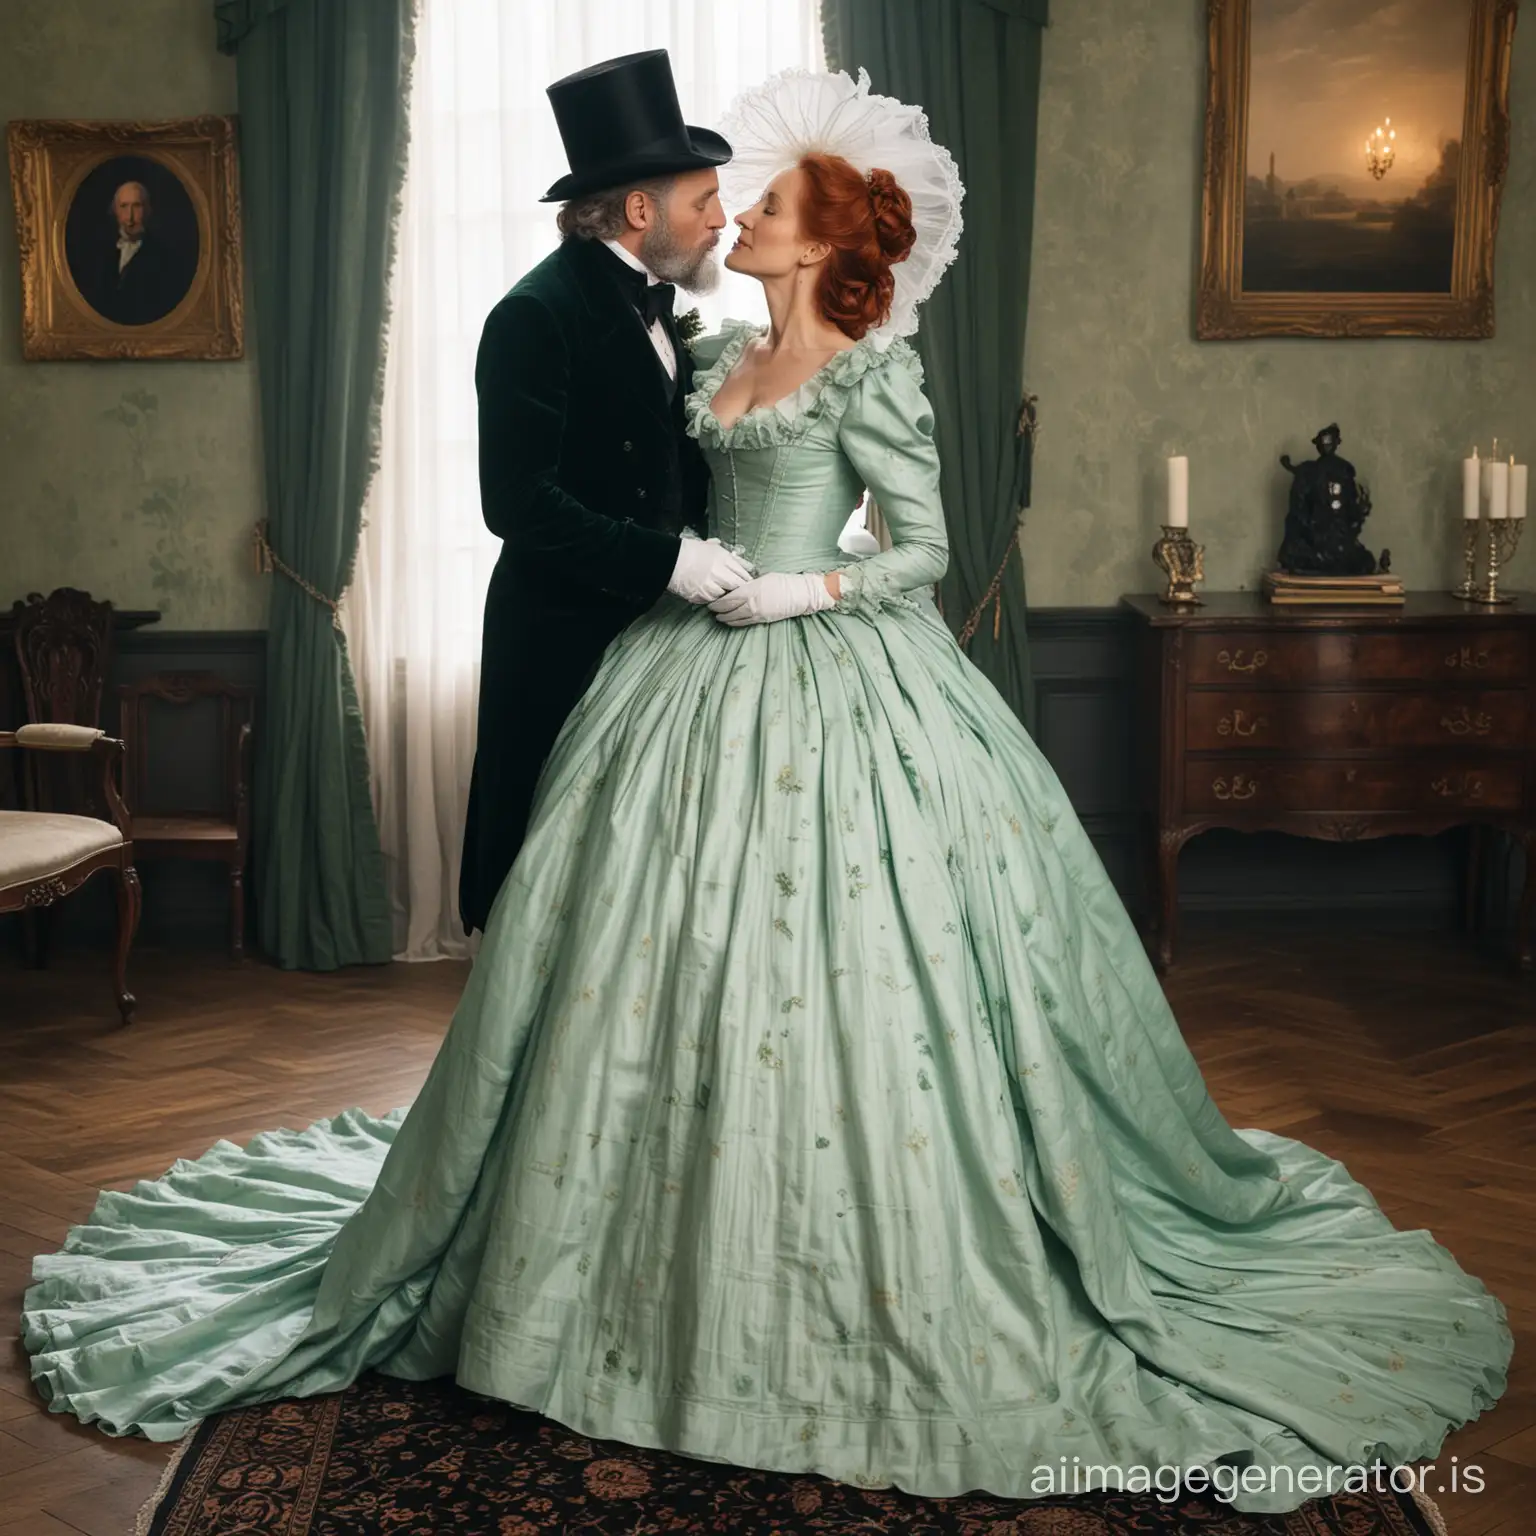 red hair Gillian Anderson wearing a poofy emerald floor-length loose billowing 1860 victorian crinoline dress with  a frilly bonnet kissing an old manin black victorian suit  who seems to be her newlywed husband